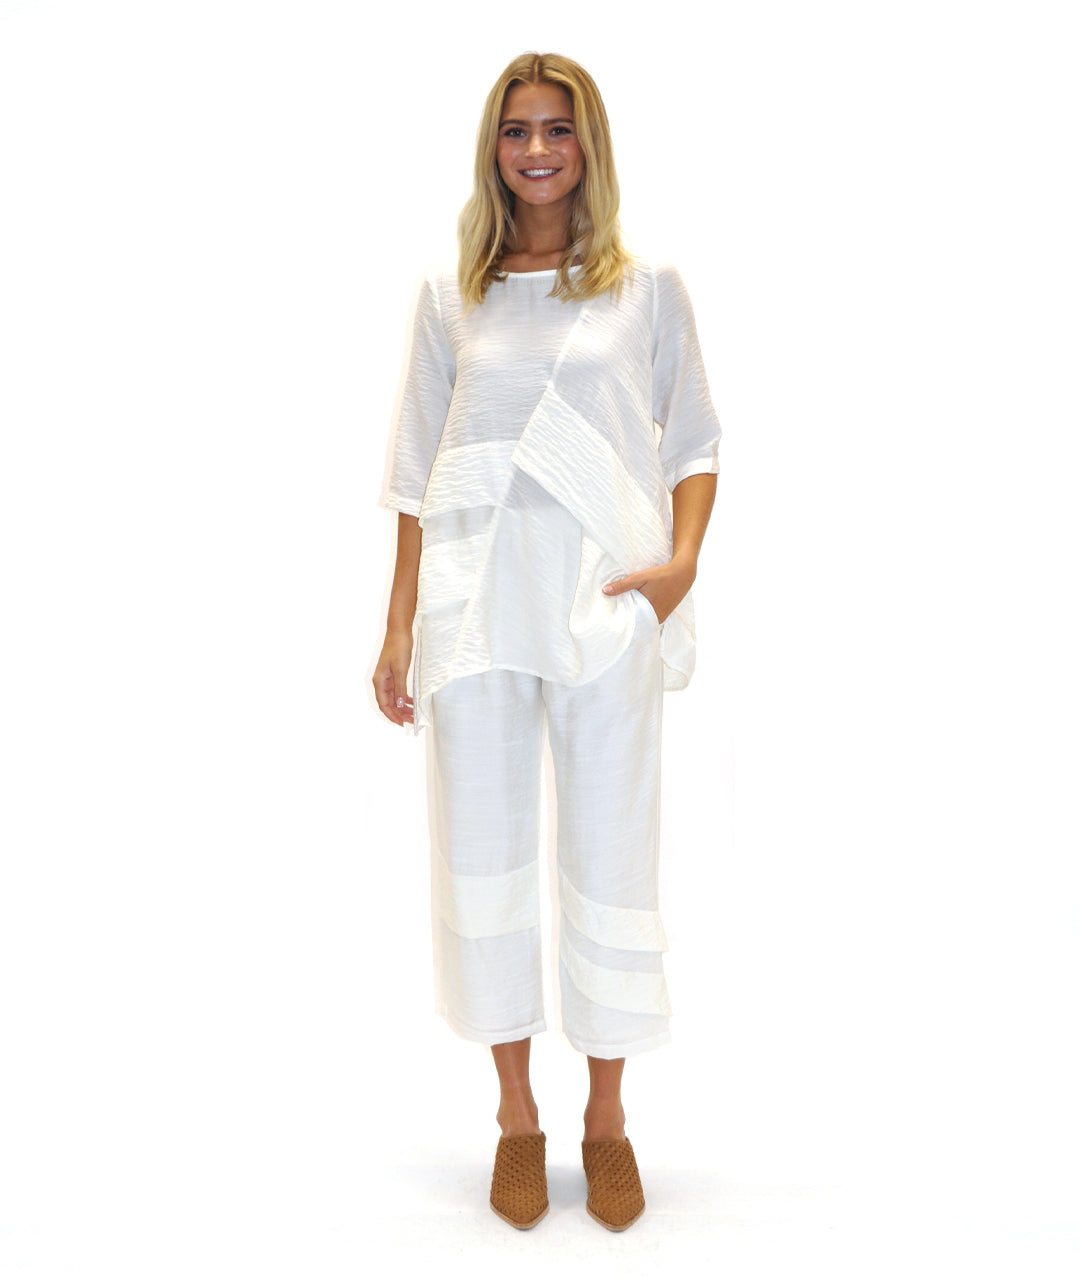 model in a white top and bottom with decorative pleating across the body and pant legs